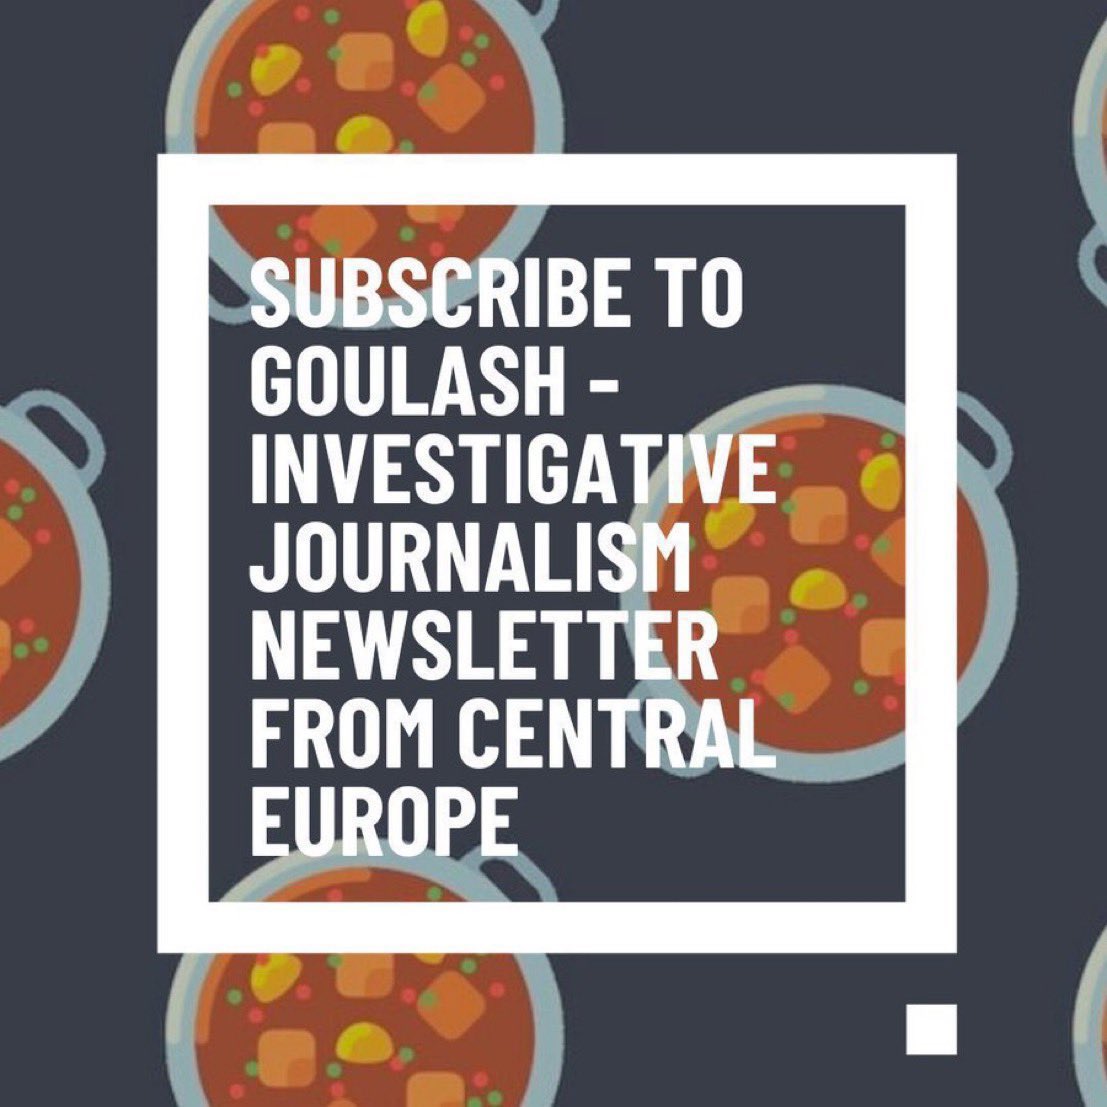 🍲 Fresh ‘Goulash’ is out soon - get @VSquare_Project’s newsletter by @panyiszabolcs with exclusive scoops & the best Central European investigative stories from us & our partners @Atlatszo @direkt36 @ICJK_sk @investigace_cz @FRONTSTORY_PL. 📩 Subscribe: vsquare.org/newsletter/